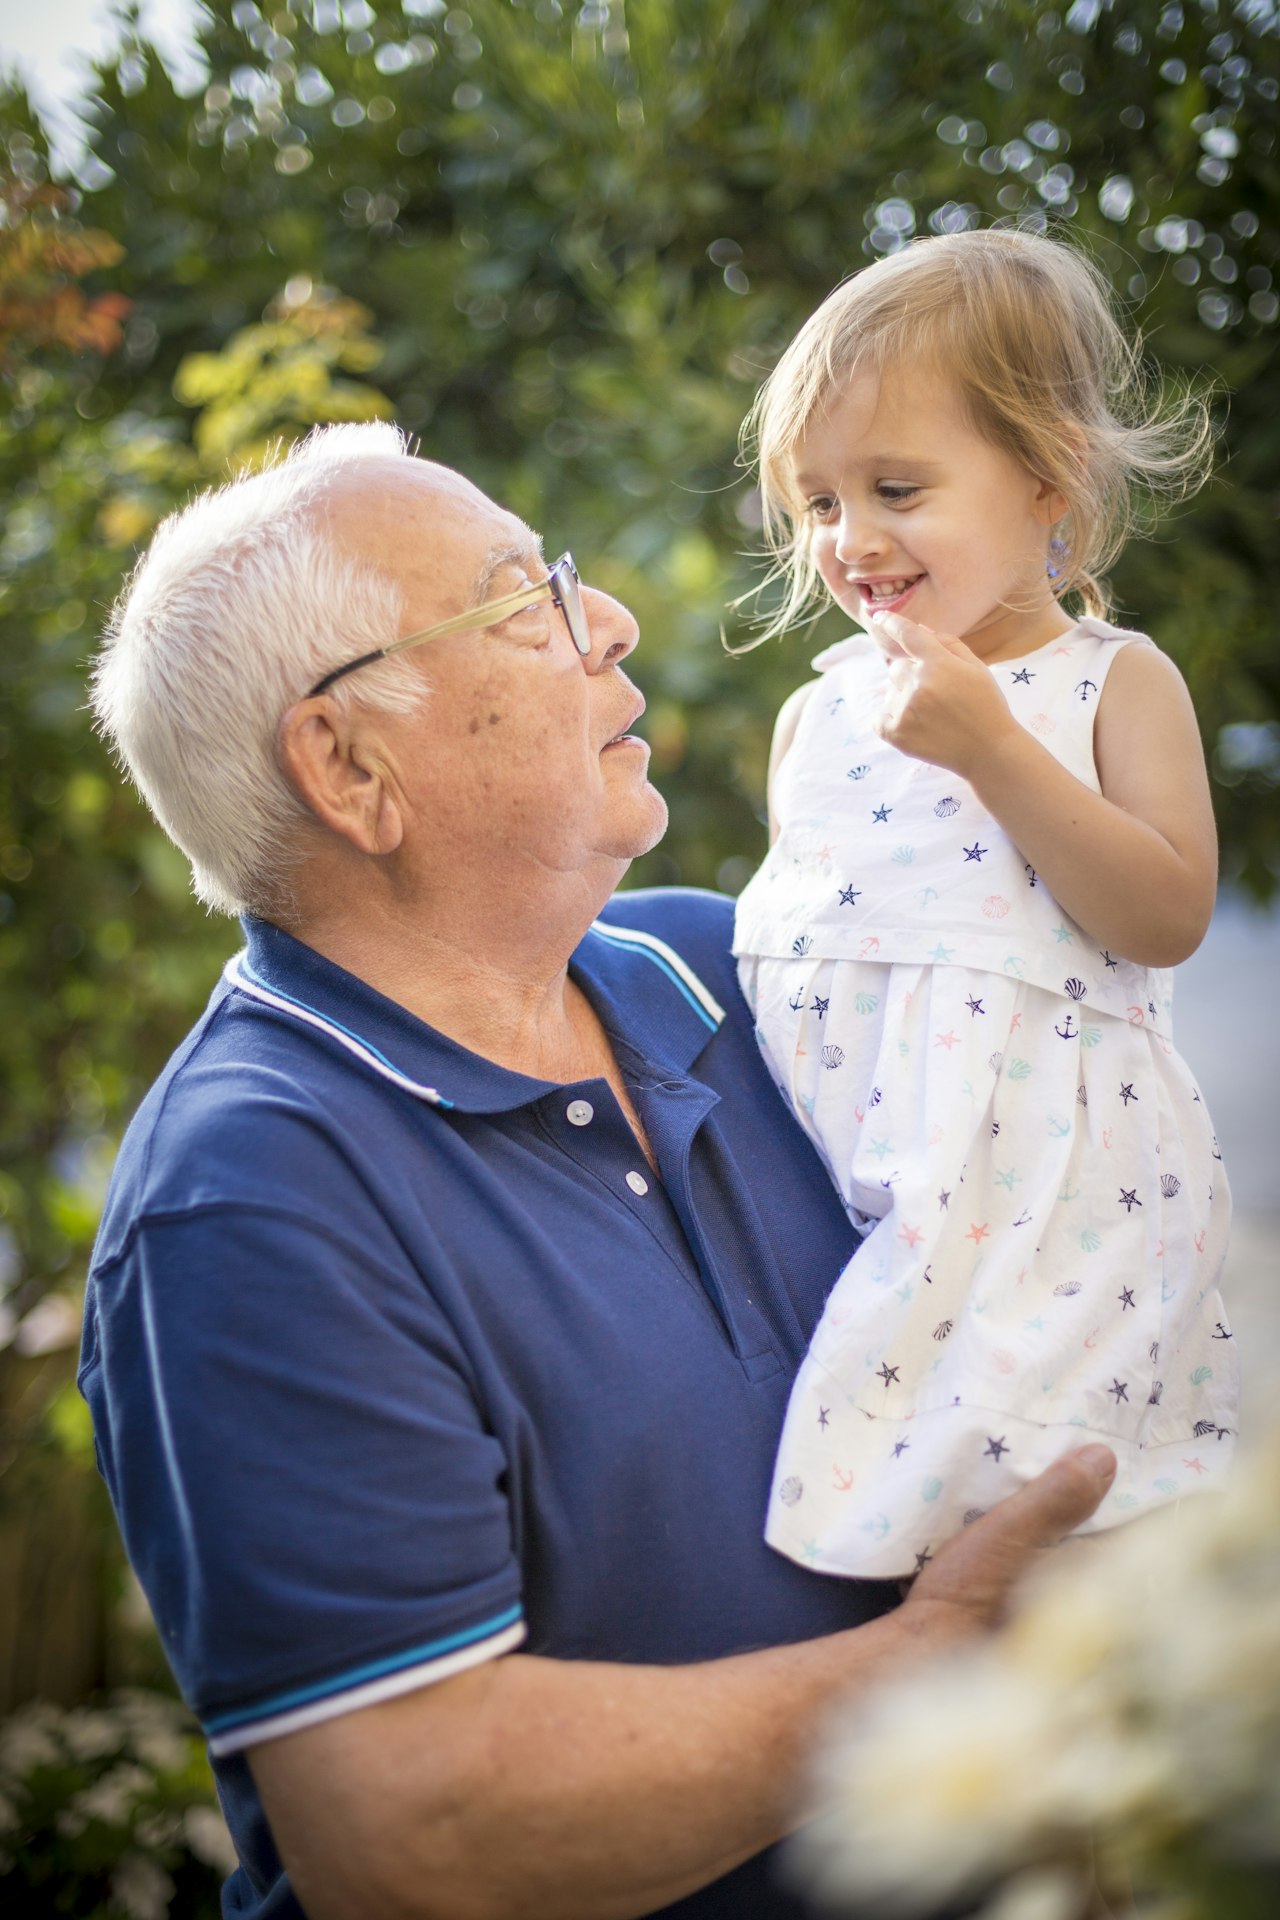 Are Grandparents Moving to Be Closer to Their Grandkids?